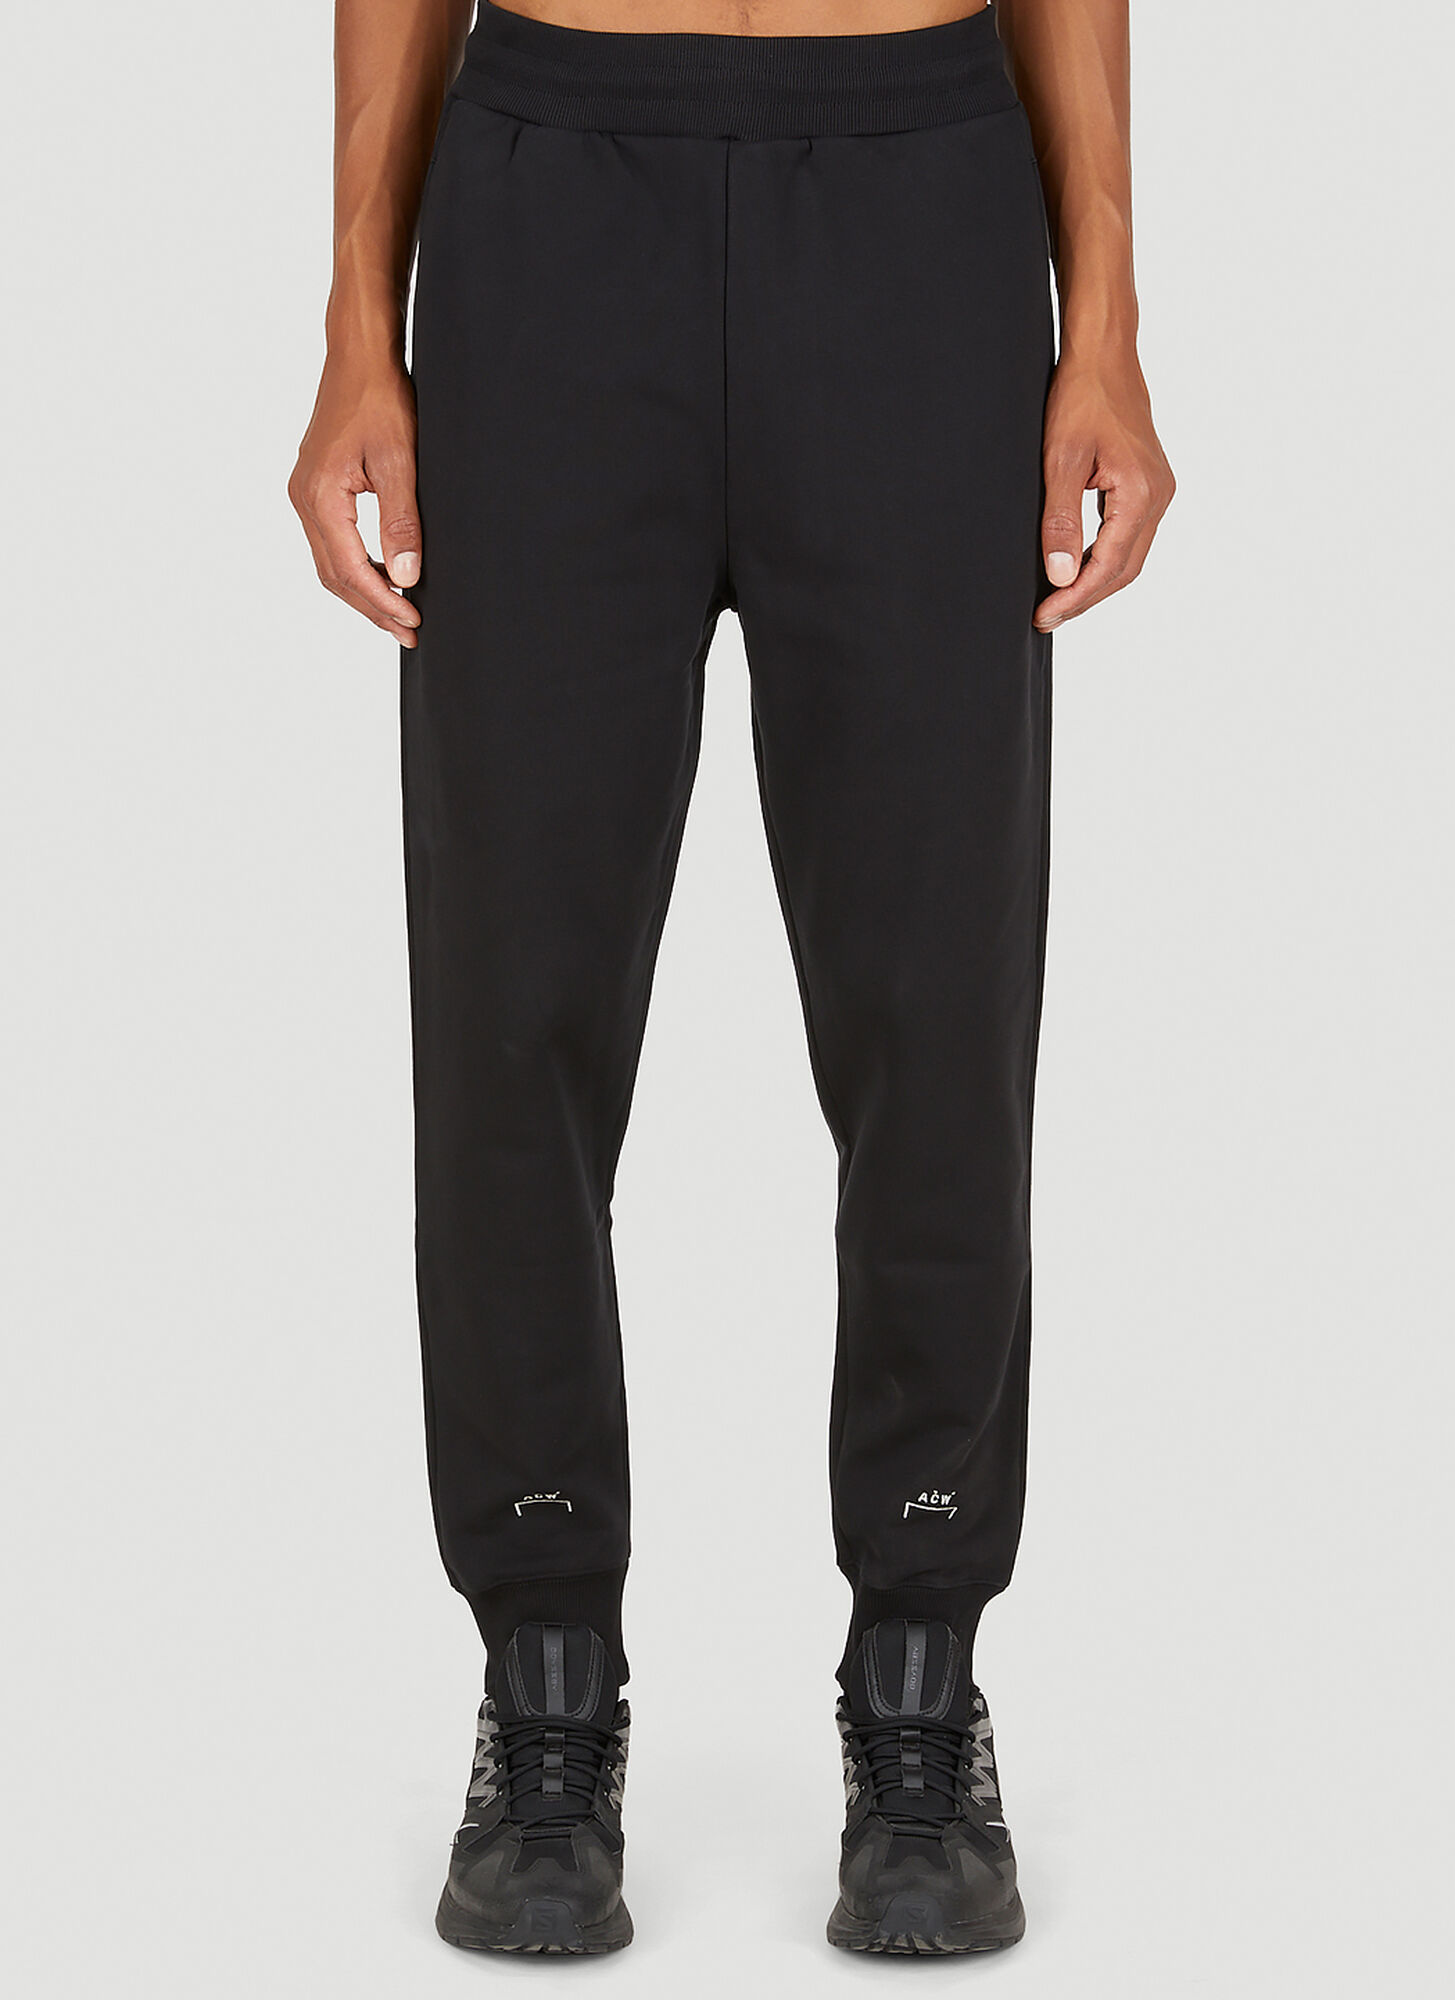 A-cold-wall* Essential Track Trousers